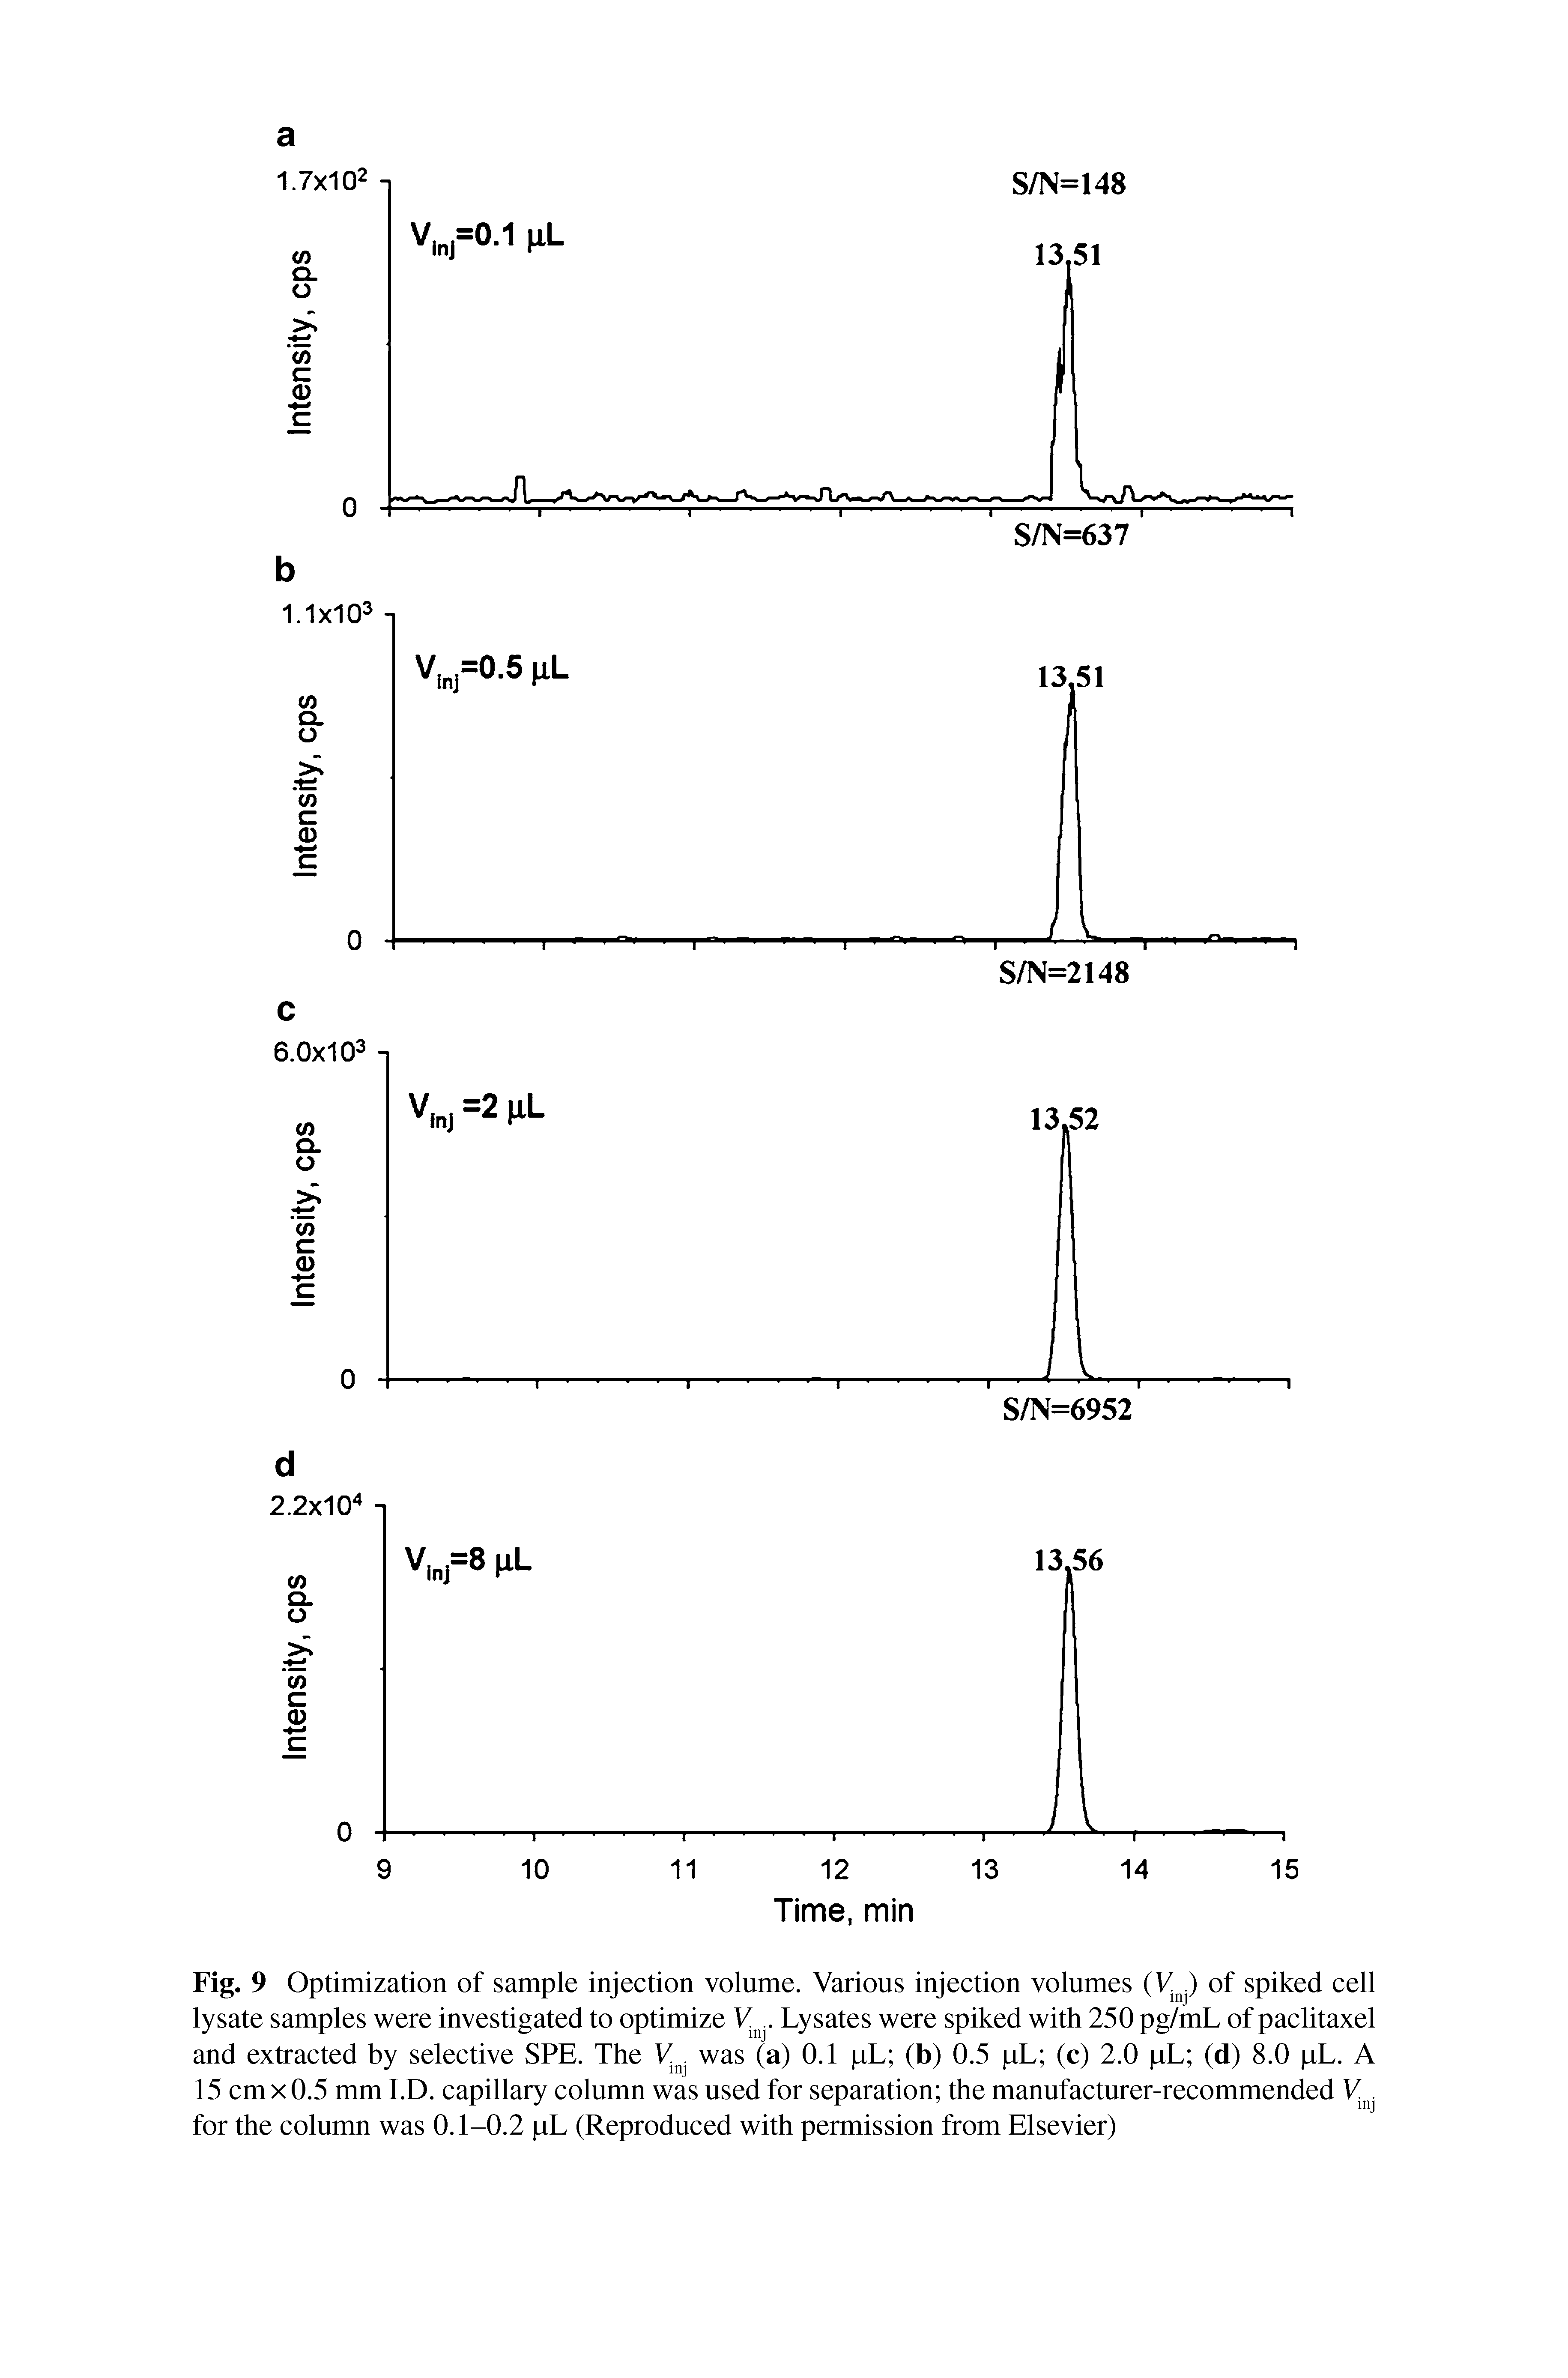 Fig. 9 Optimization of sample injection volume. Various injection volumes (VL) of spiked cell lysate samples were investigated to optimize VL. Lysates were spiked with 250 pg/mL of paclitaxel and extracted by selective SPE. The VL was (a) 0.1 pL (b) 0.5 pL (c) 2.0 pL (d) 8.0 pL. A 15 cm x 0.5 mm I.D. capillary column was used for separation the manufacturer-recommended Vnj for the column was 0.1-0.2 pL (Reproduced with permission from Elsevier)...